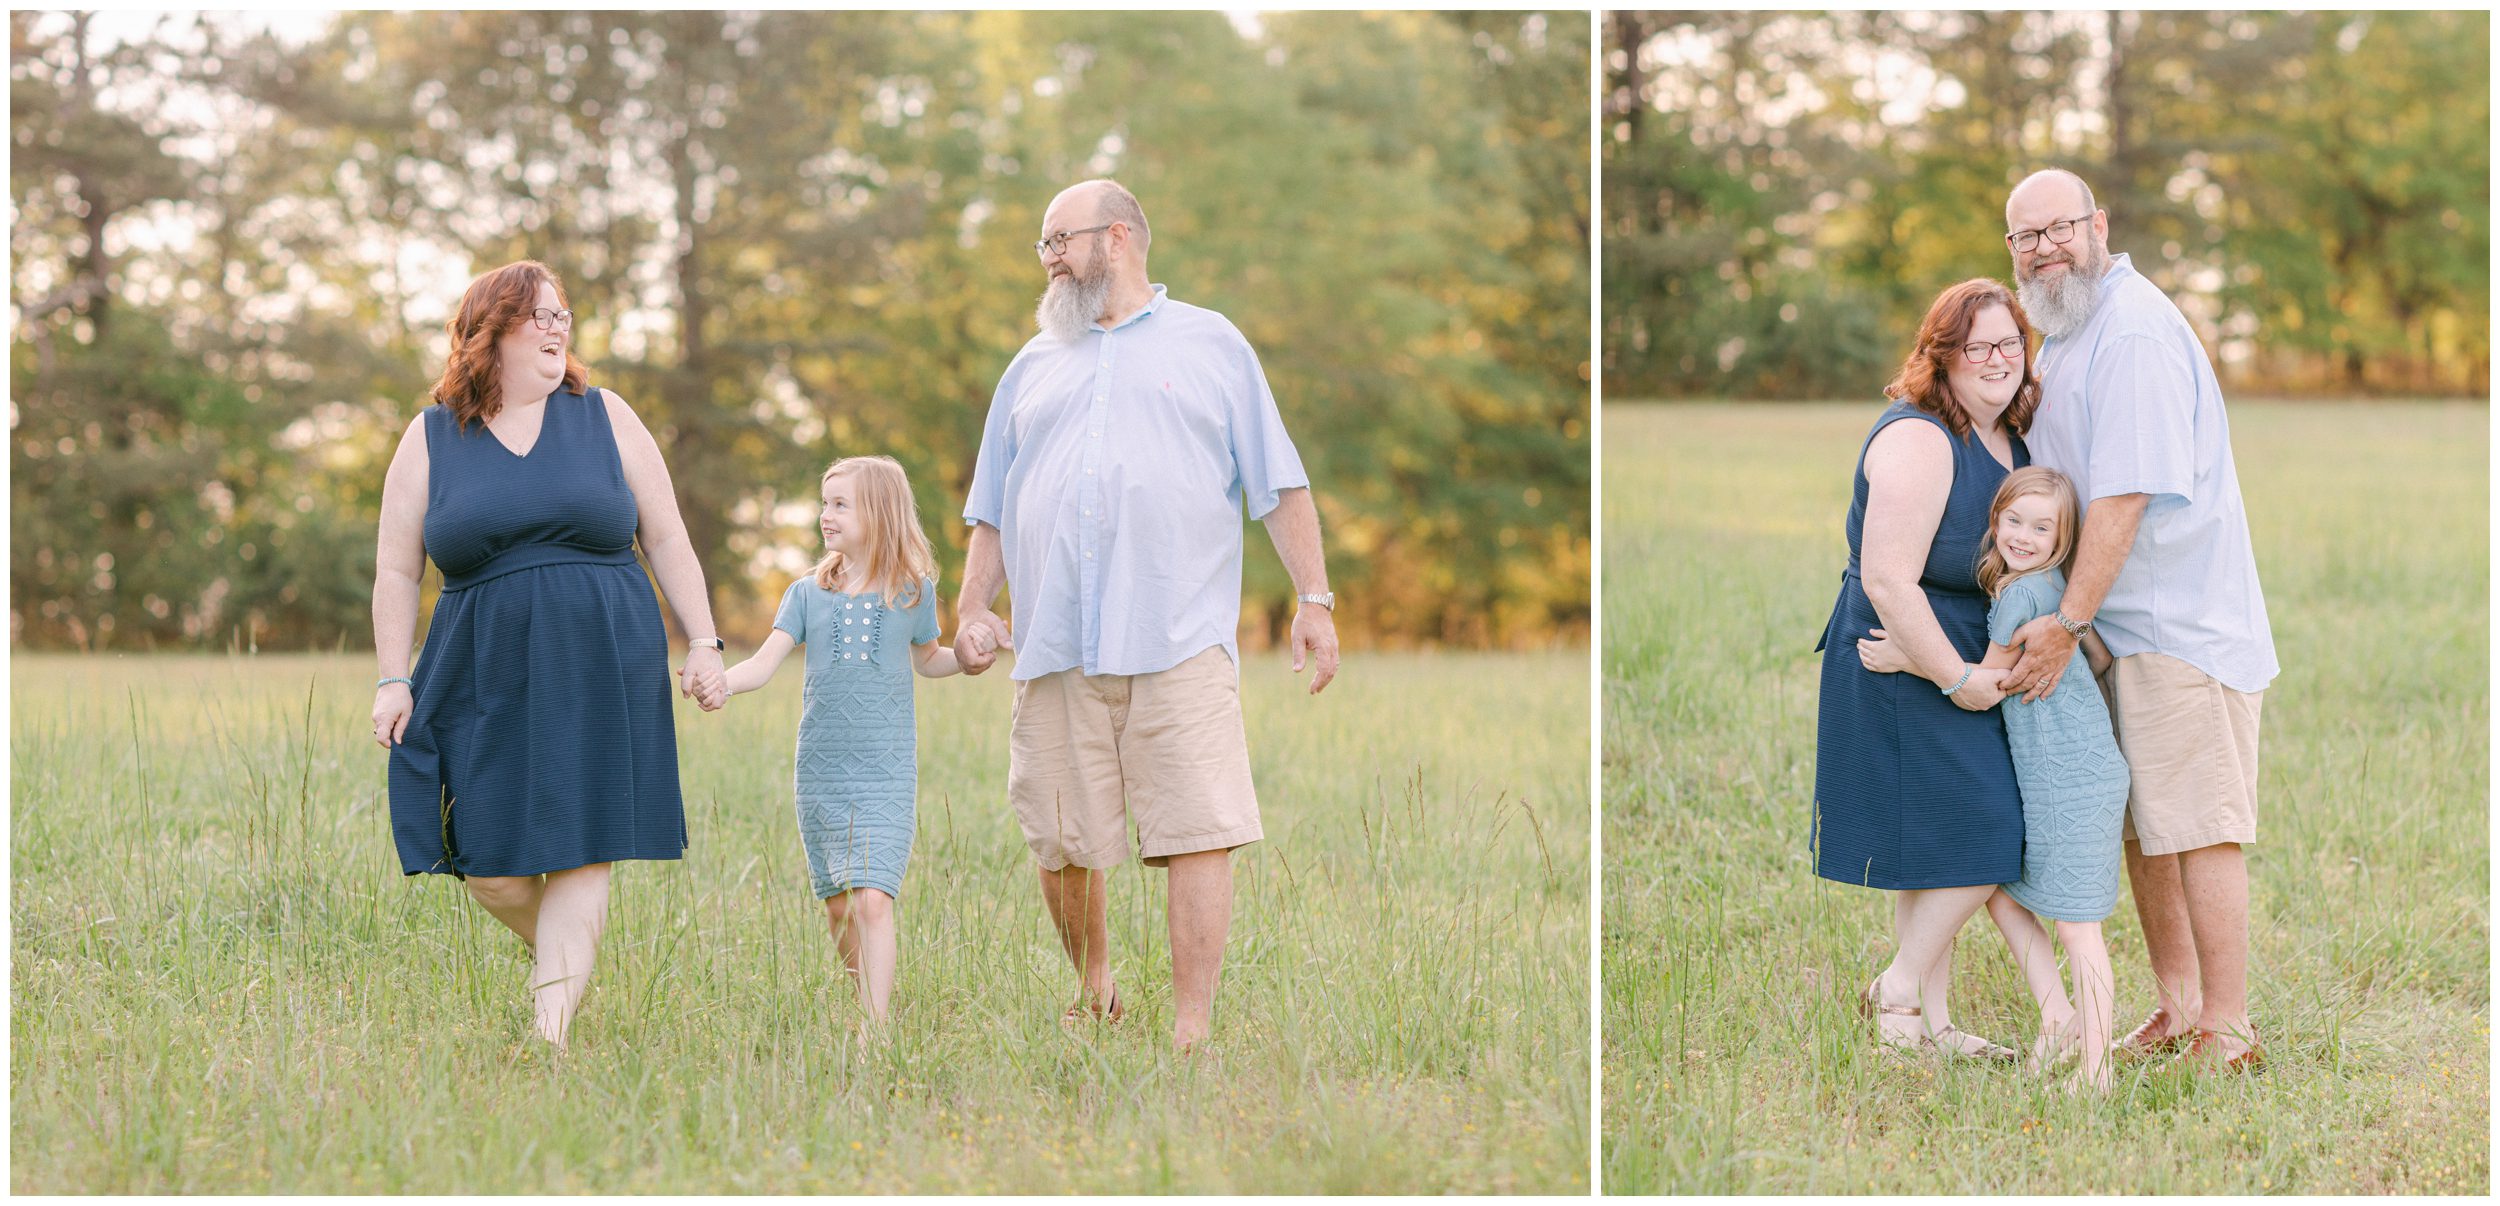 Natural family photos outside in a field in Watkinsville, GA